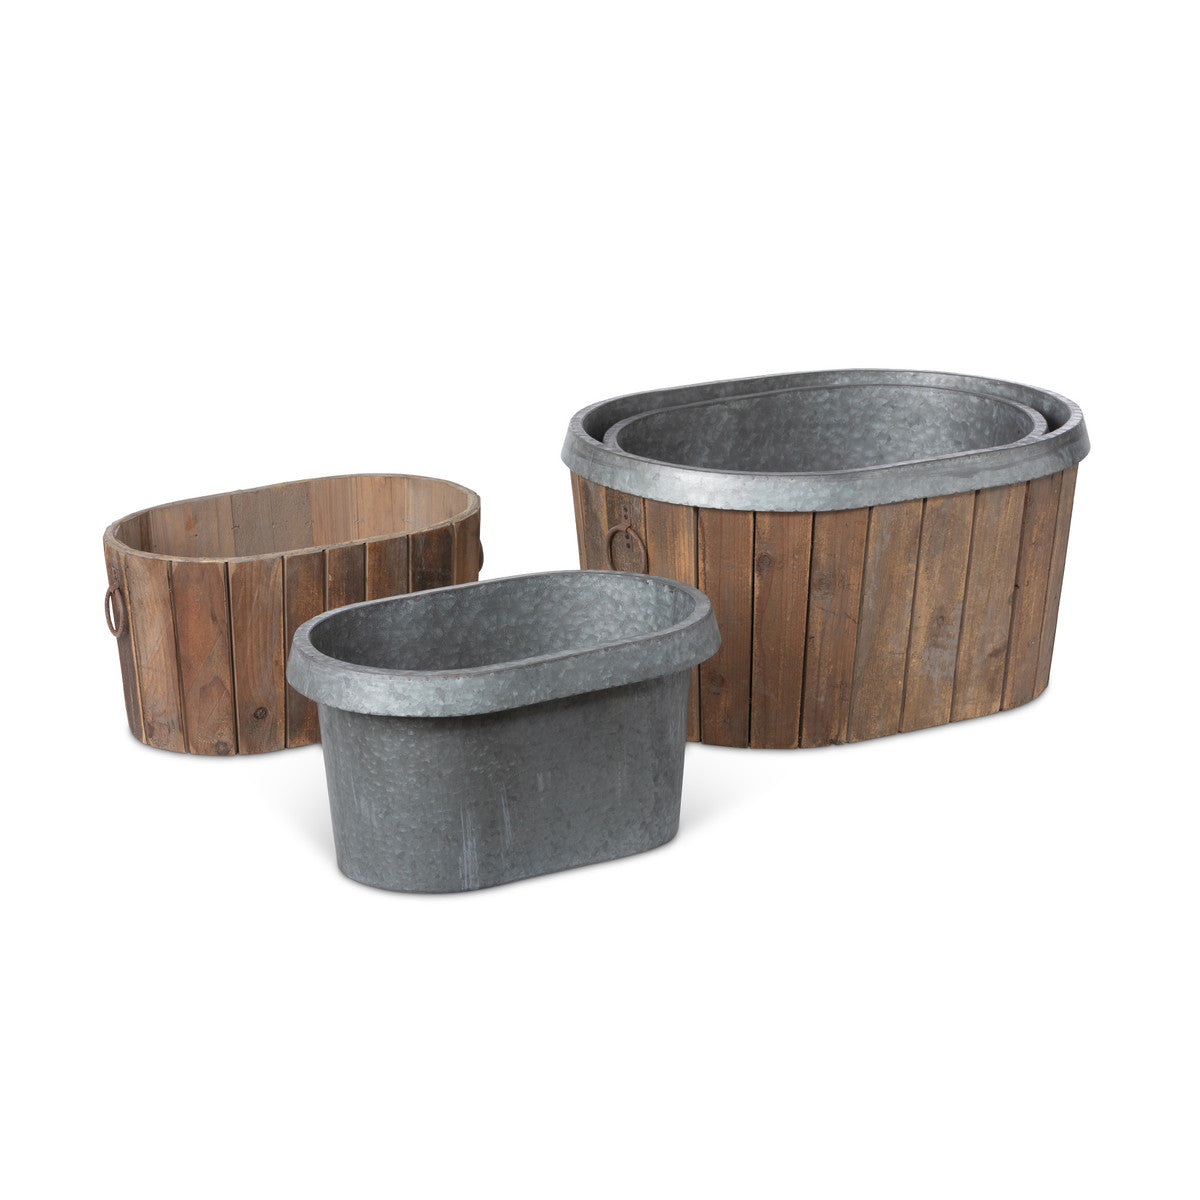 Galvanized Wooden Oval Tub Party Bucket Planter, Set of 3